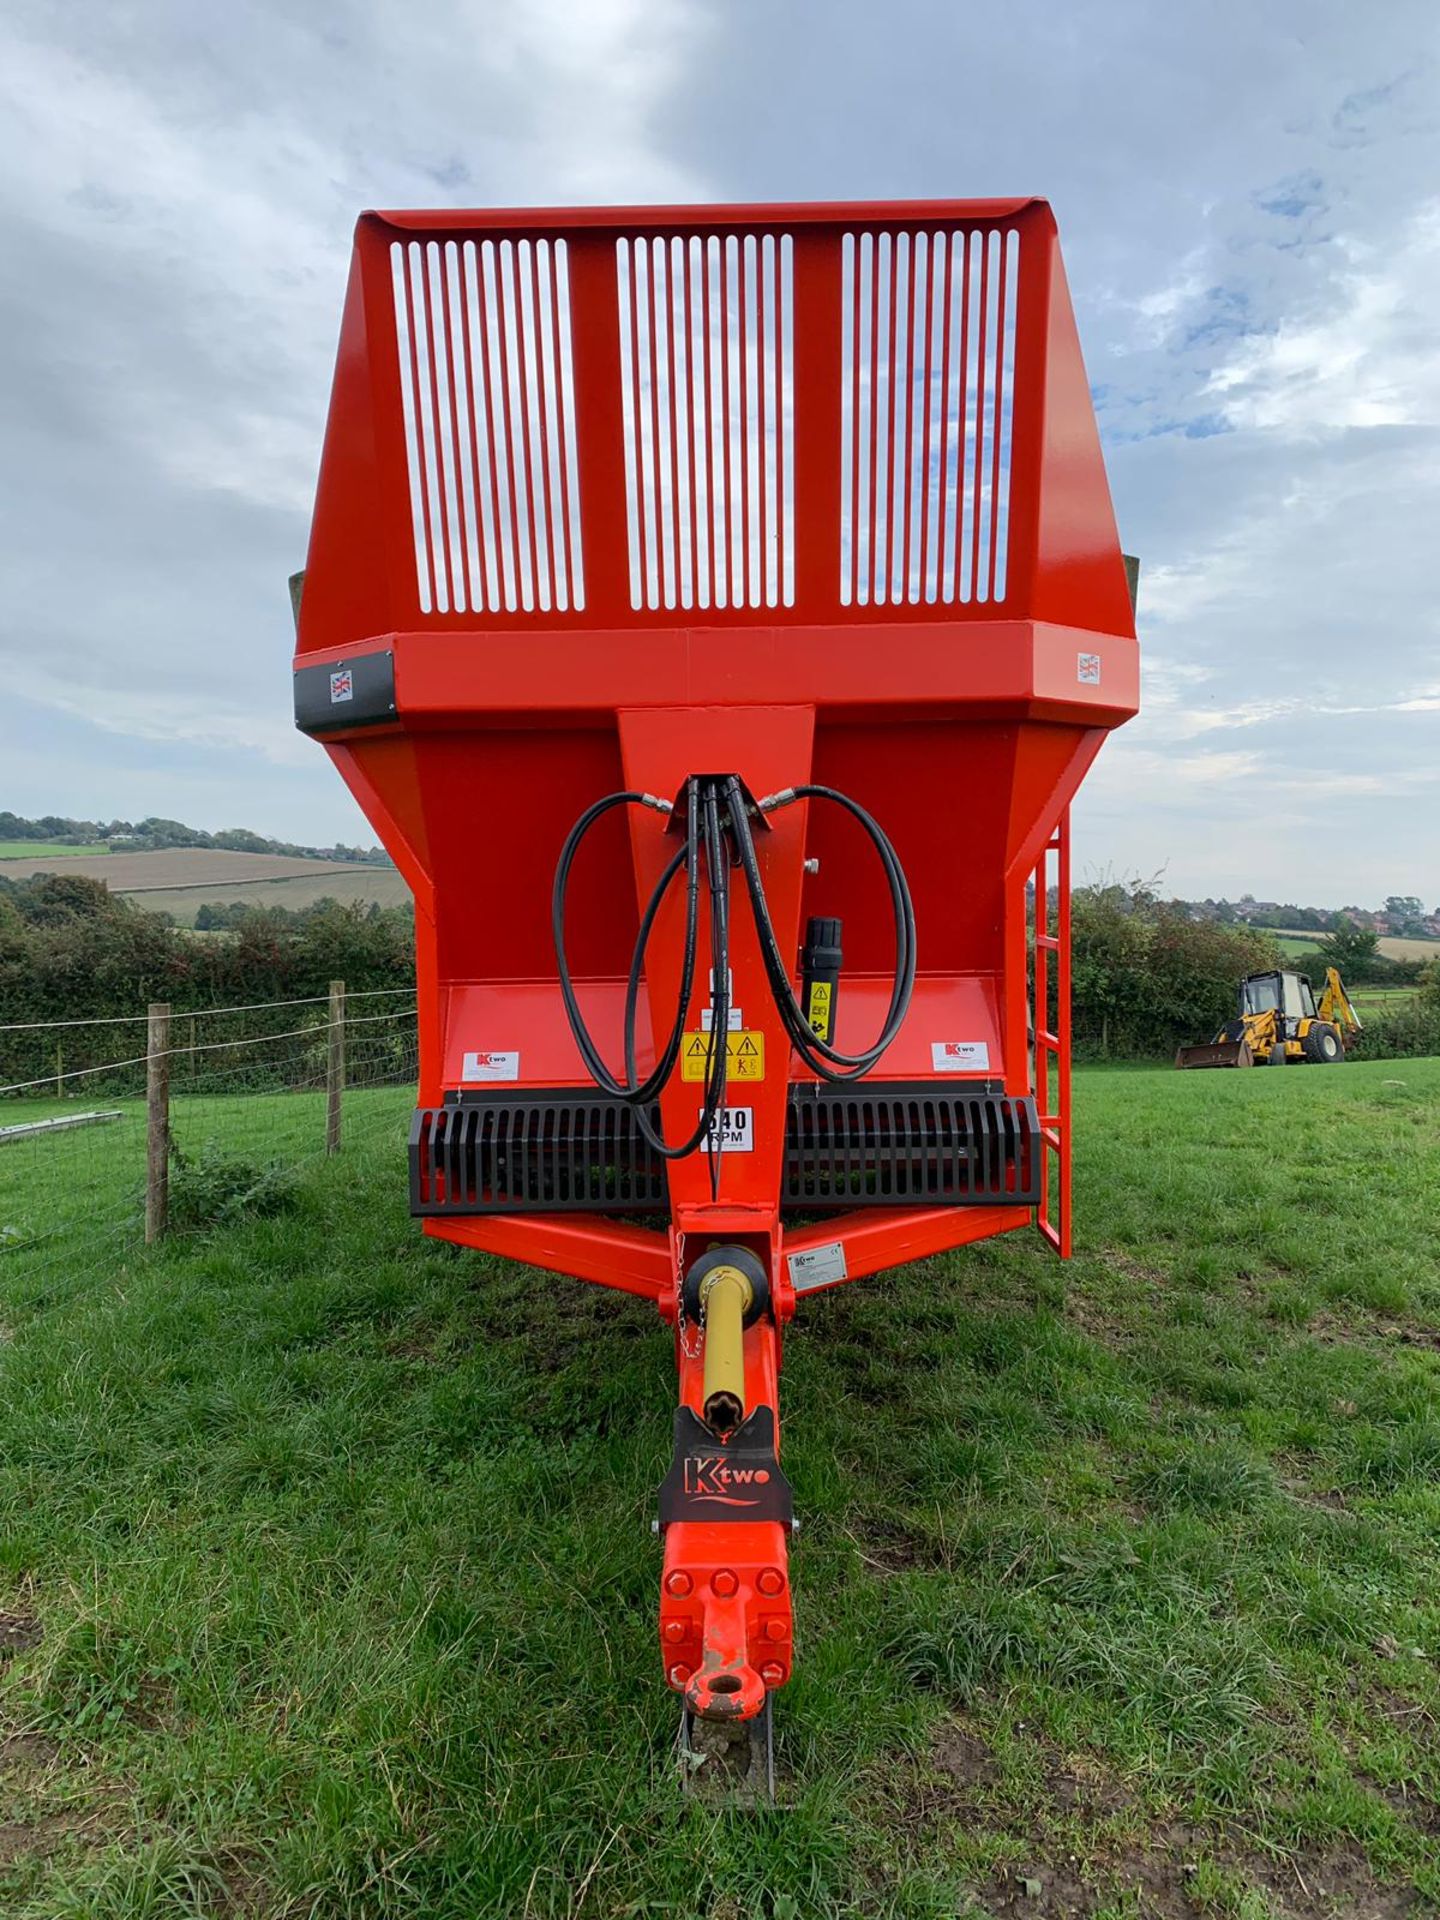 BRAND NEW 12 TONNE KTWO MUCK SPREADER, NEVER BEEN USED *PLUS VAT* - Image 2 of 11